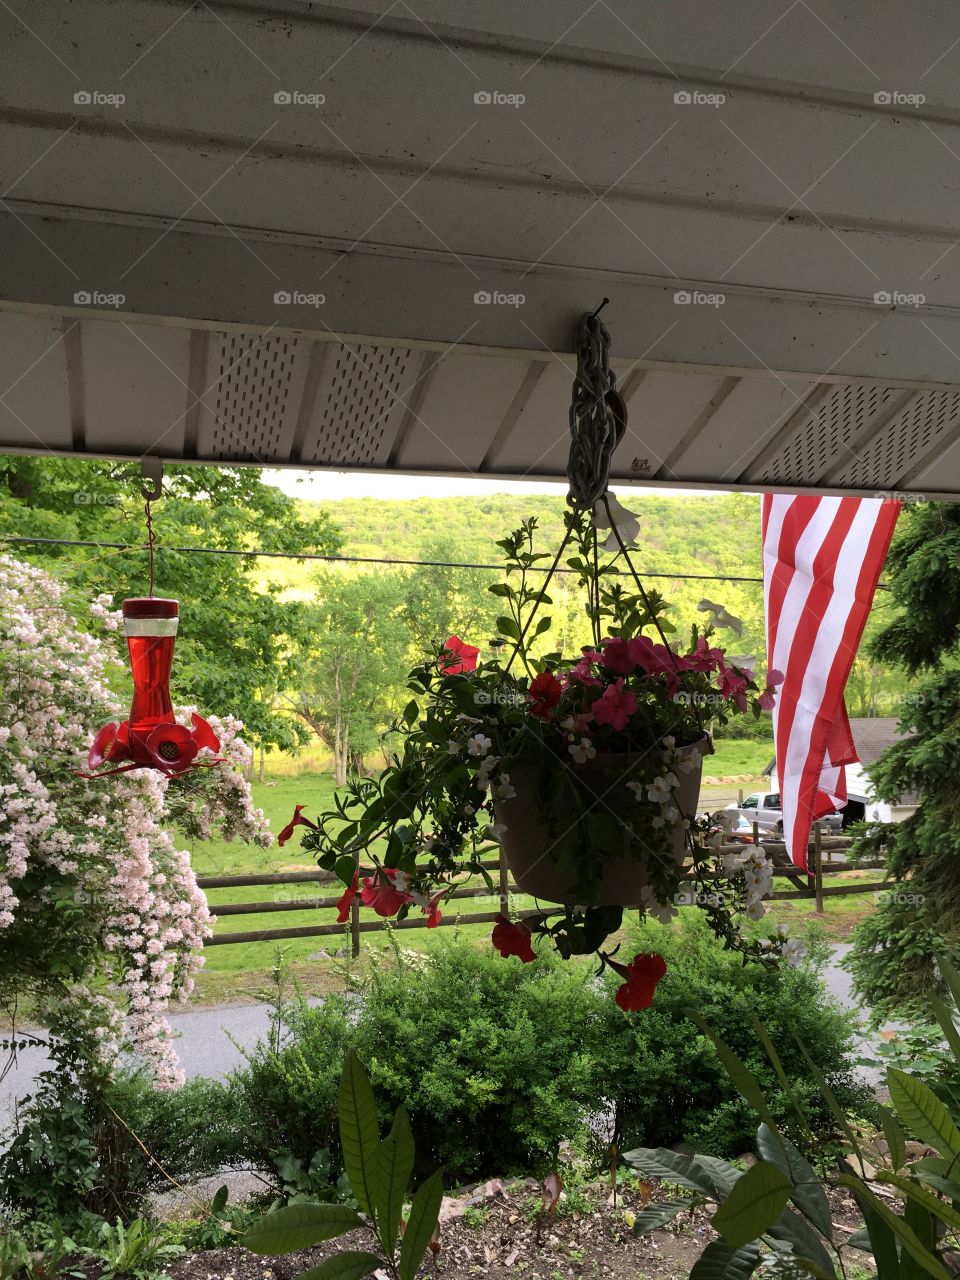 Front porch. Home in the mountains. Spring bursting with vegetation and flowers. Hummingbird feeder and American flag. 